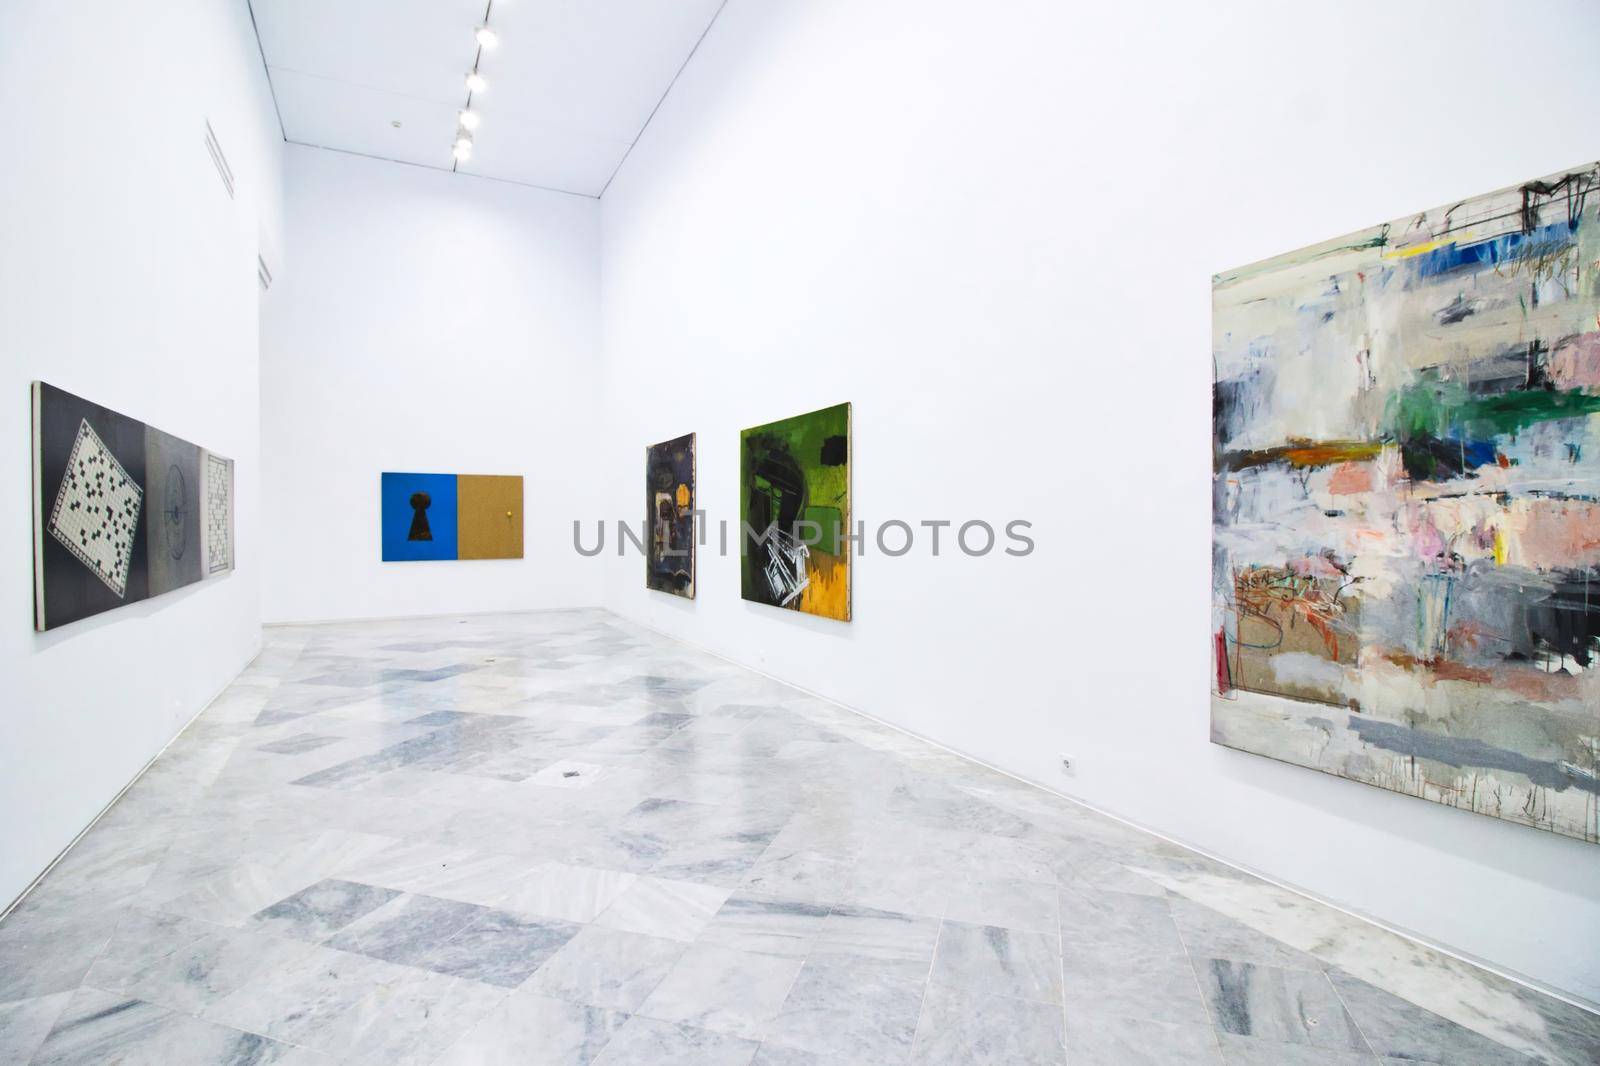 25 Jan 2022 - Seville, Spain: Room in a modern art gallery with large paintings on the walls